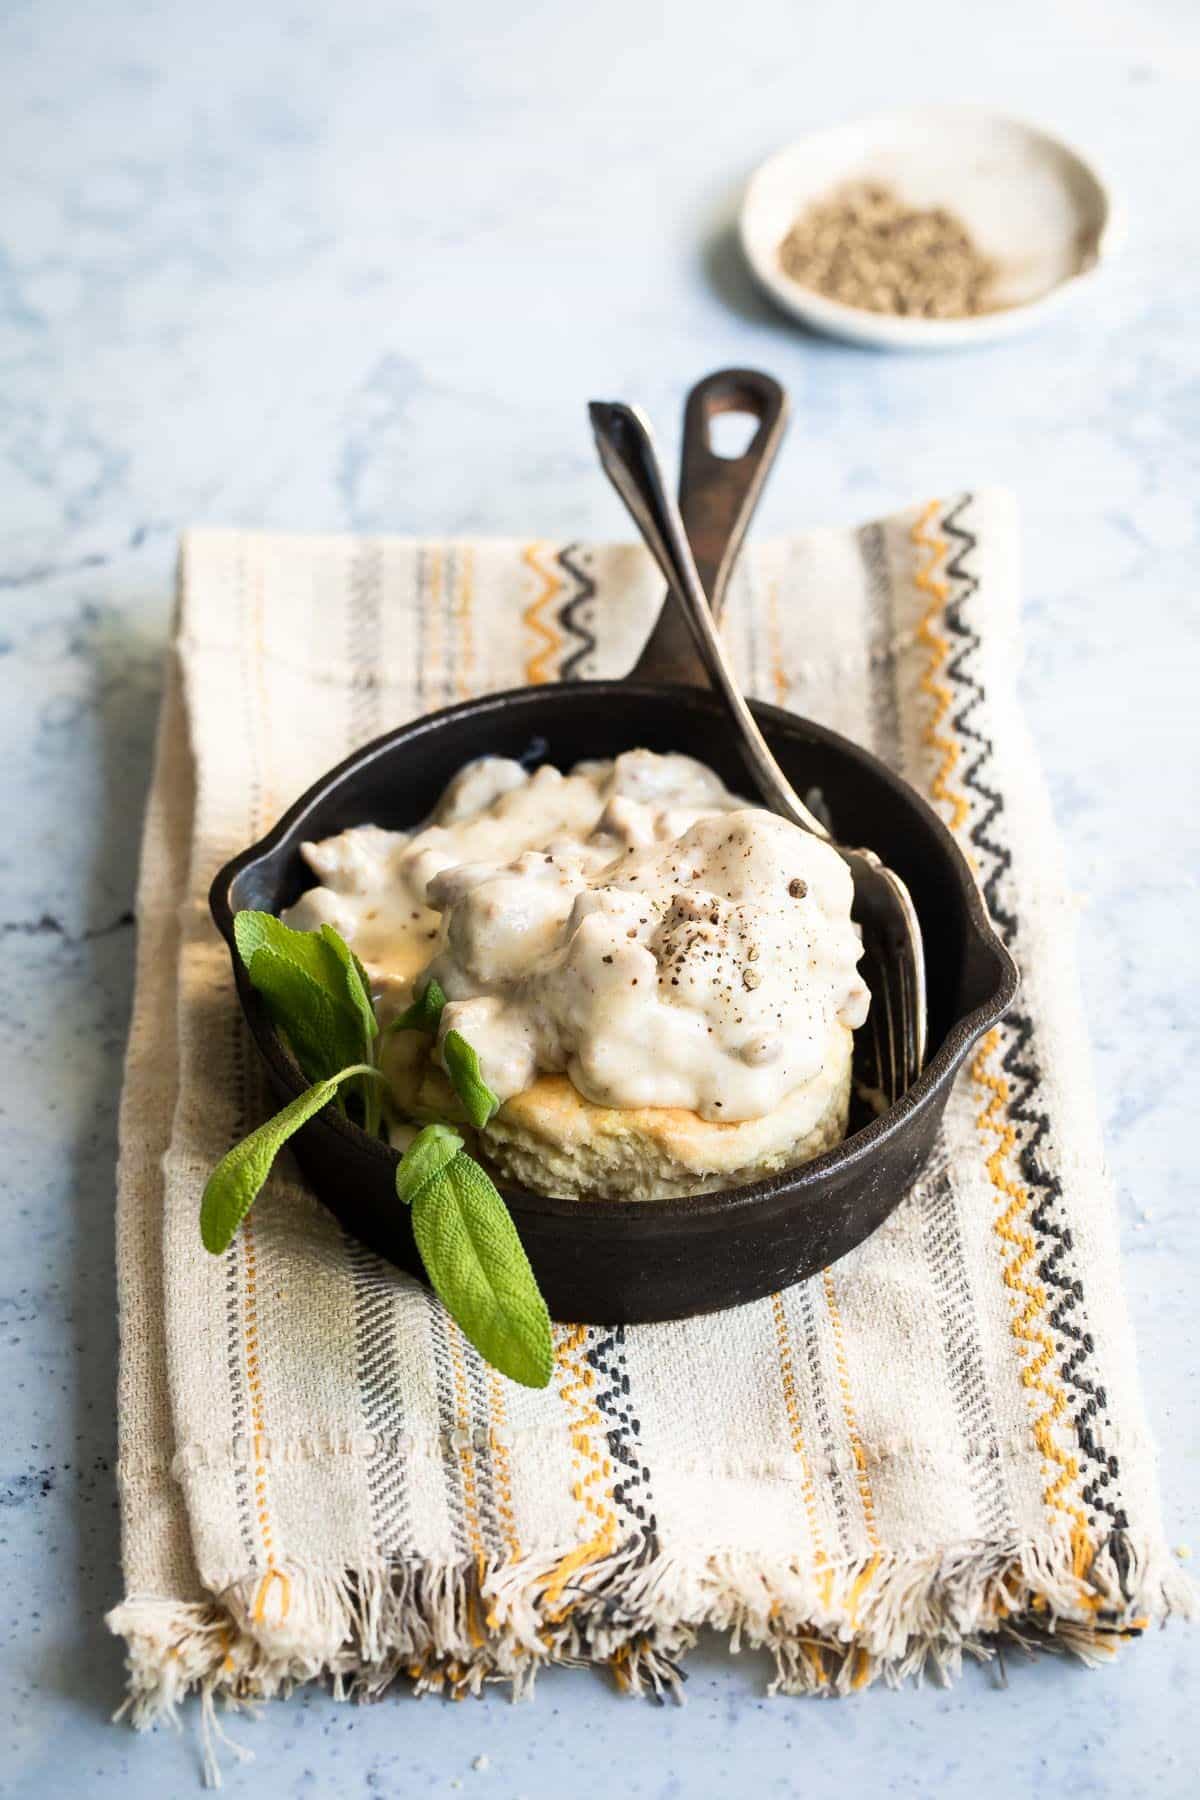 Biscuits and gravy in a black skillet.